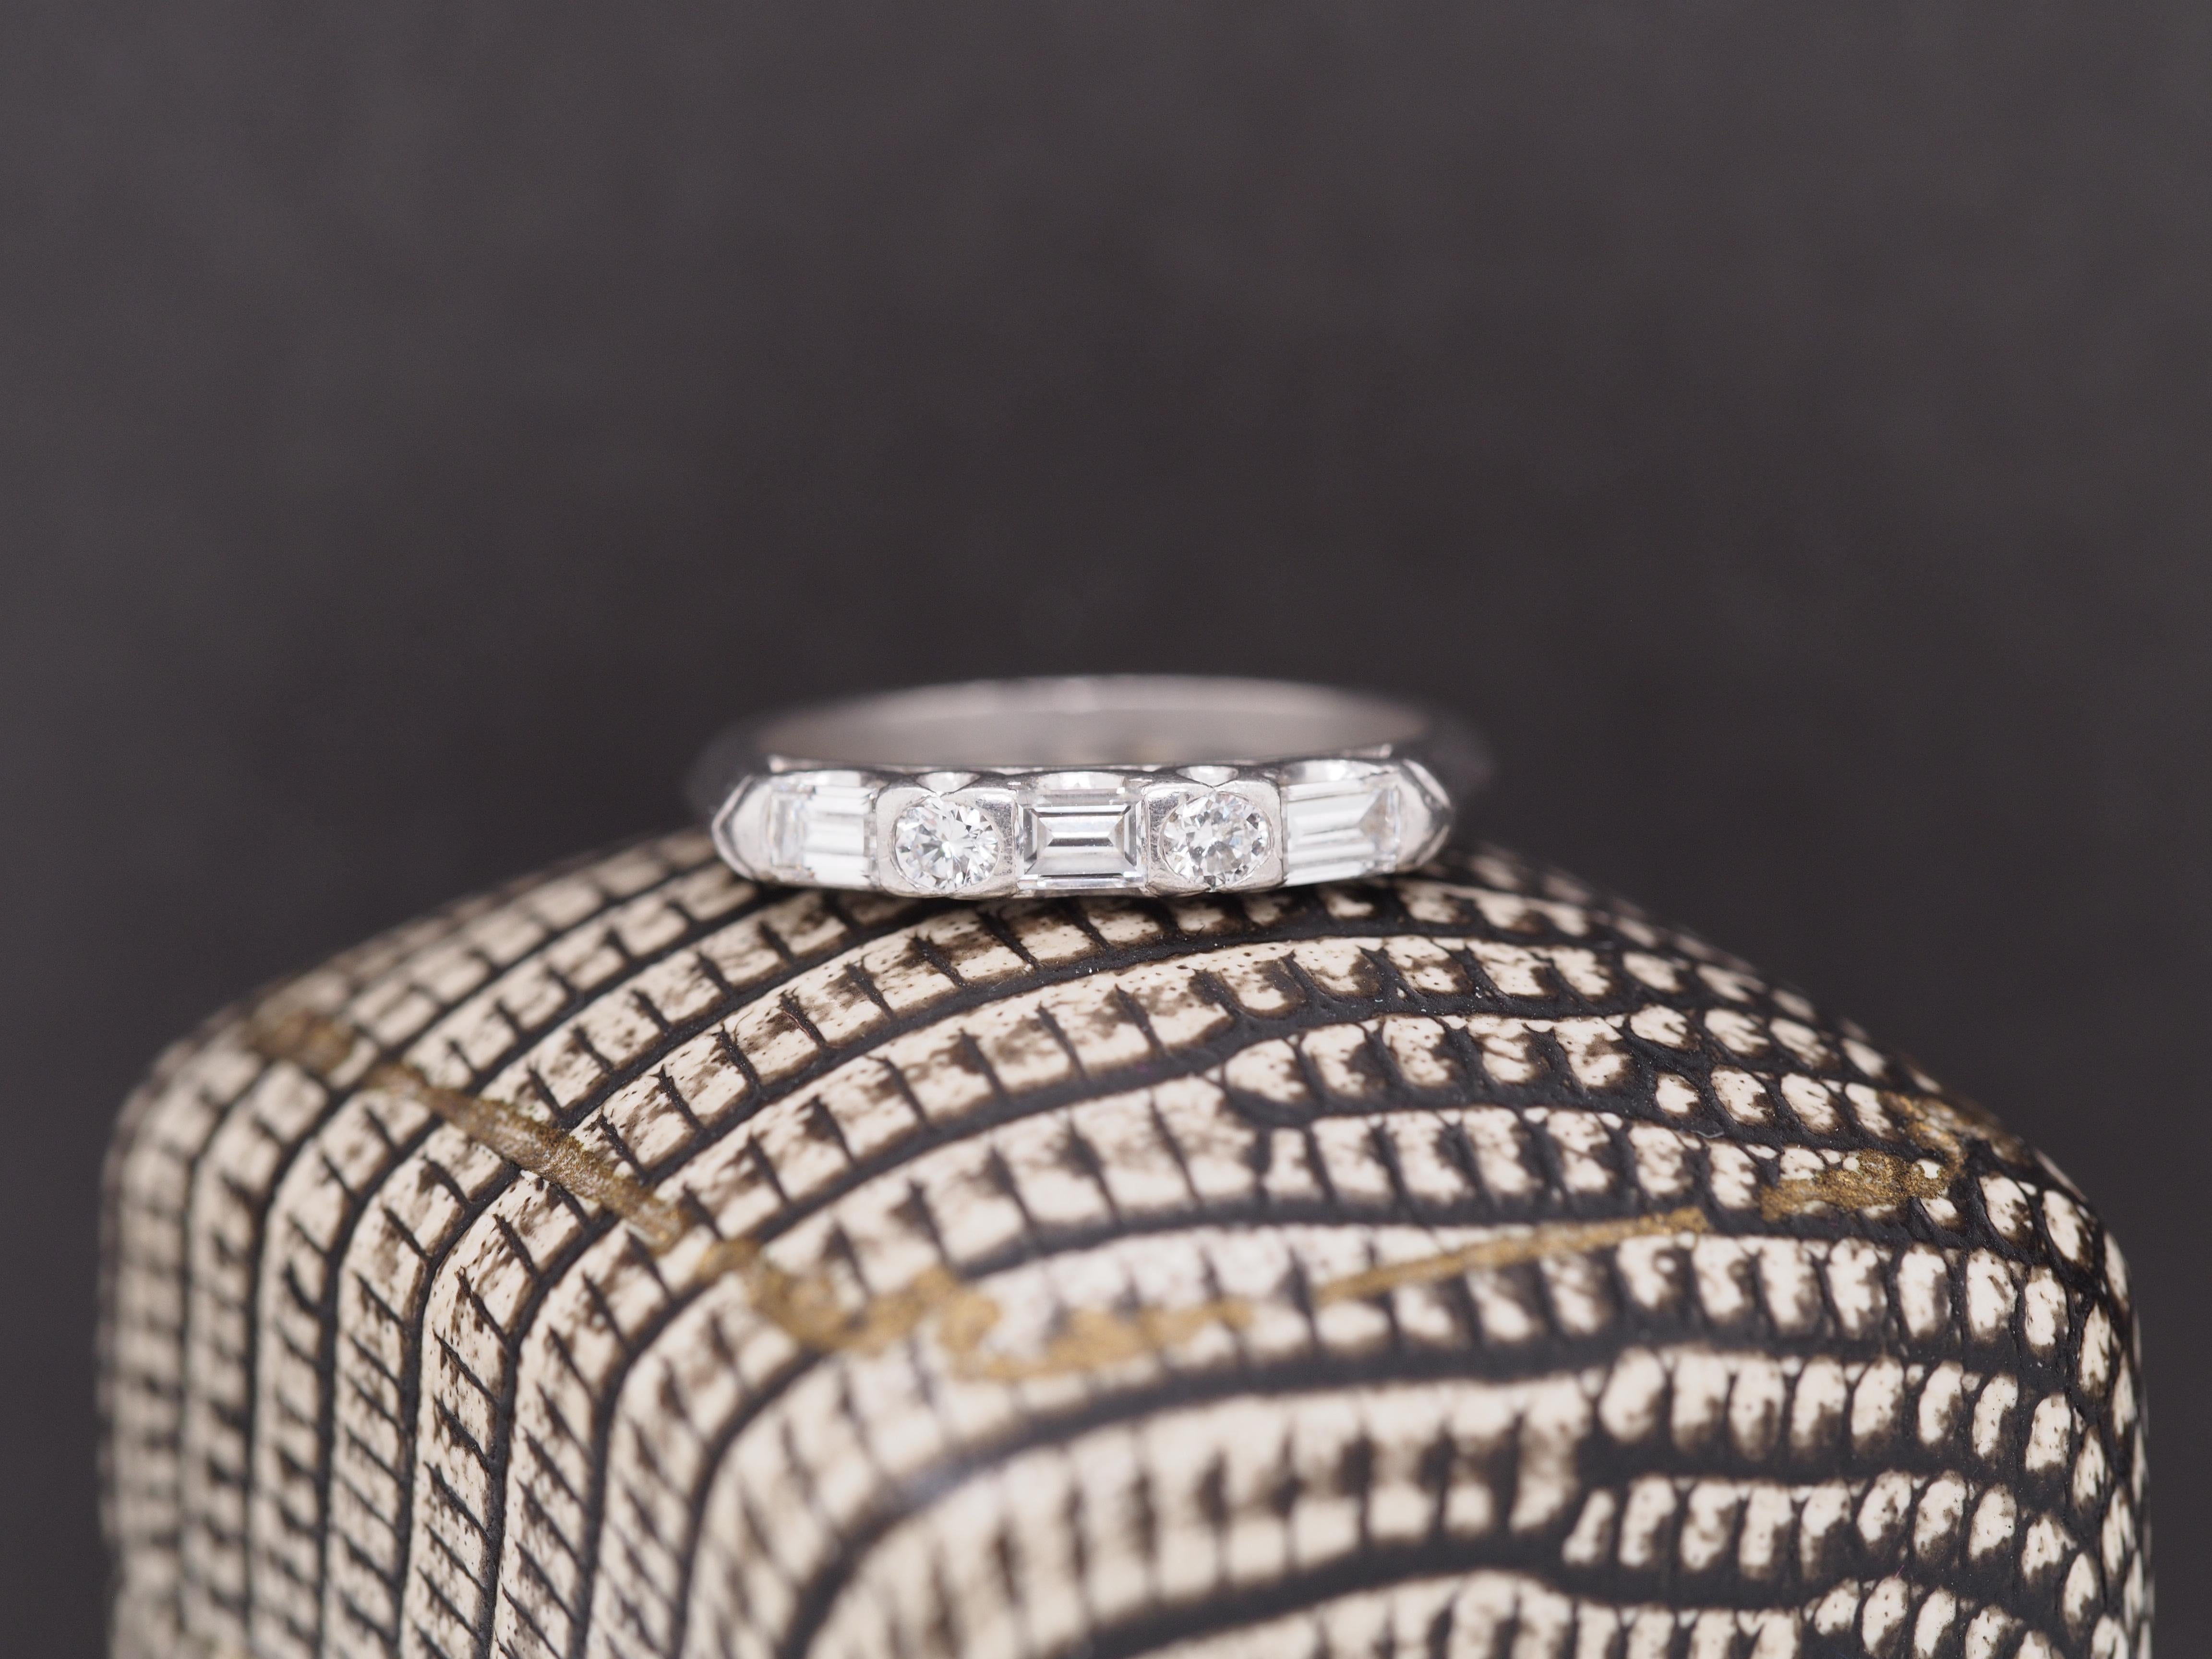 Year: 1960s
Item Details:
Ring Size: 5
Metal Type: Platinum [Hallmarked, and Tested]
Weight: 3.8 grams
Diamond Details: .40ct, total. Transitional Round and Straight Baguette Cut, Natural Diamonds, E/F Color, VS Clarity
Band Width: 2 mm
Condition: